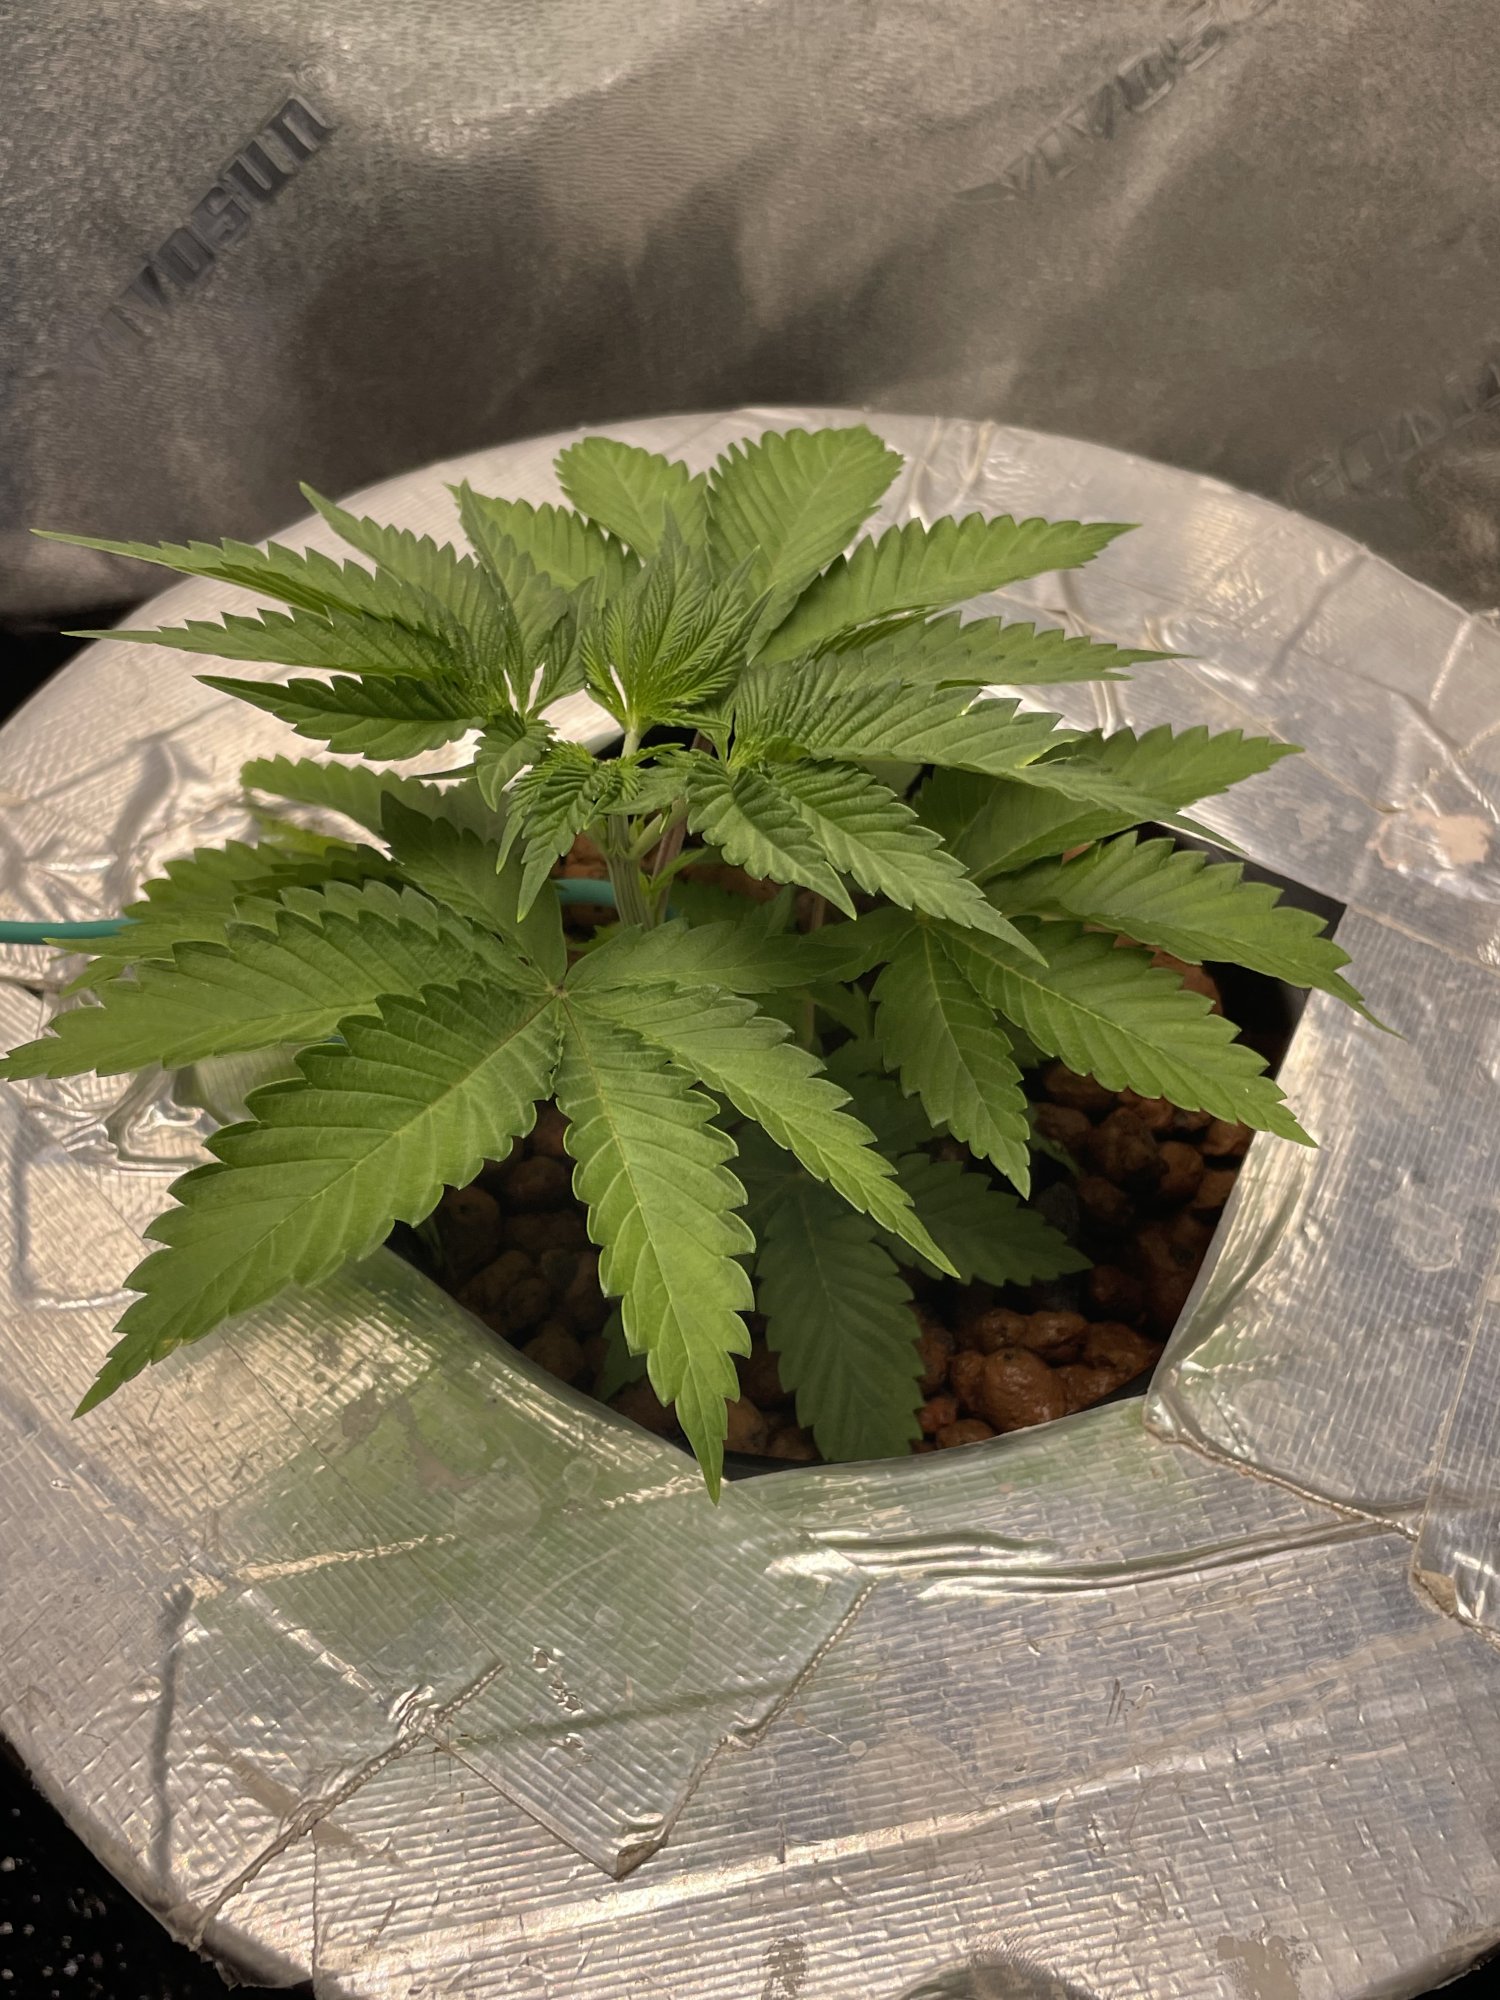 I just topped her can i scrog now